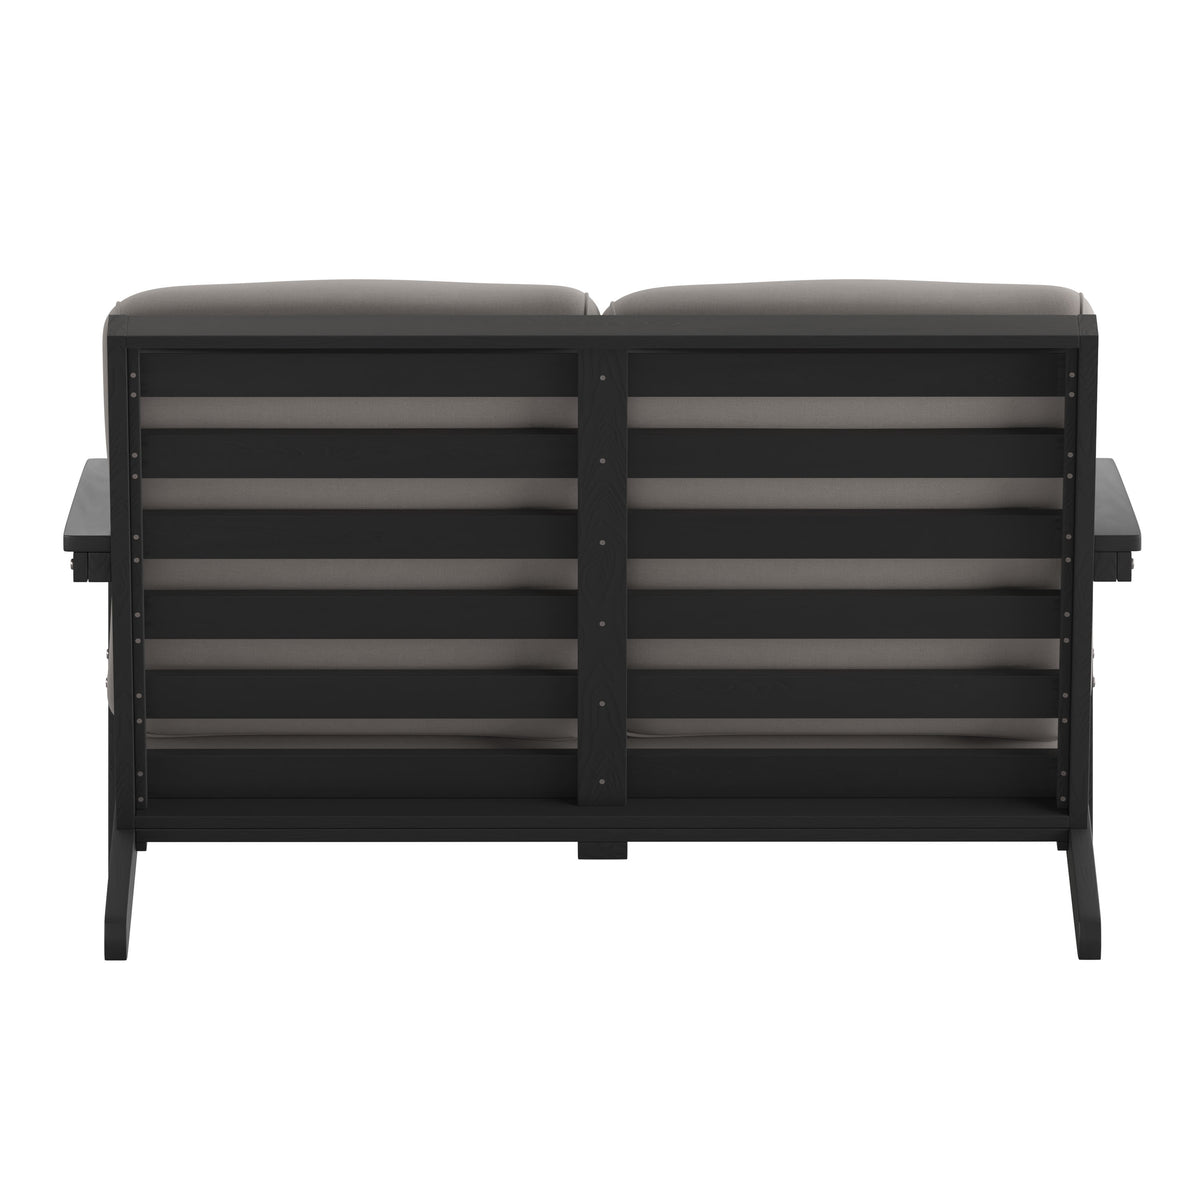 Black/Charcoal |#| All-Weather Poly Resin Adirondack Loveseat & Cushions - Black/Charcoal